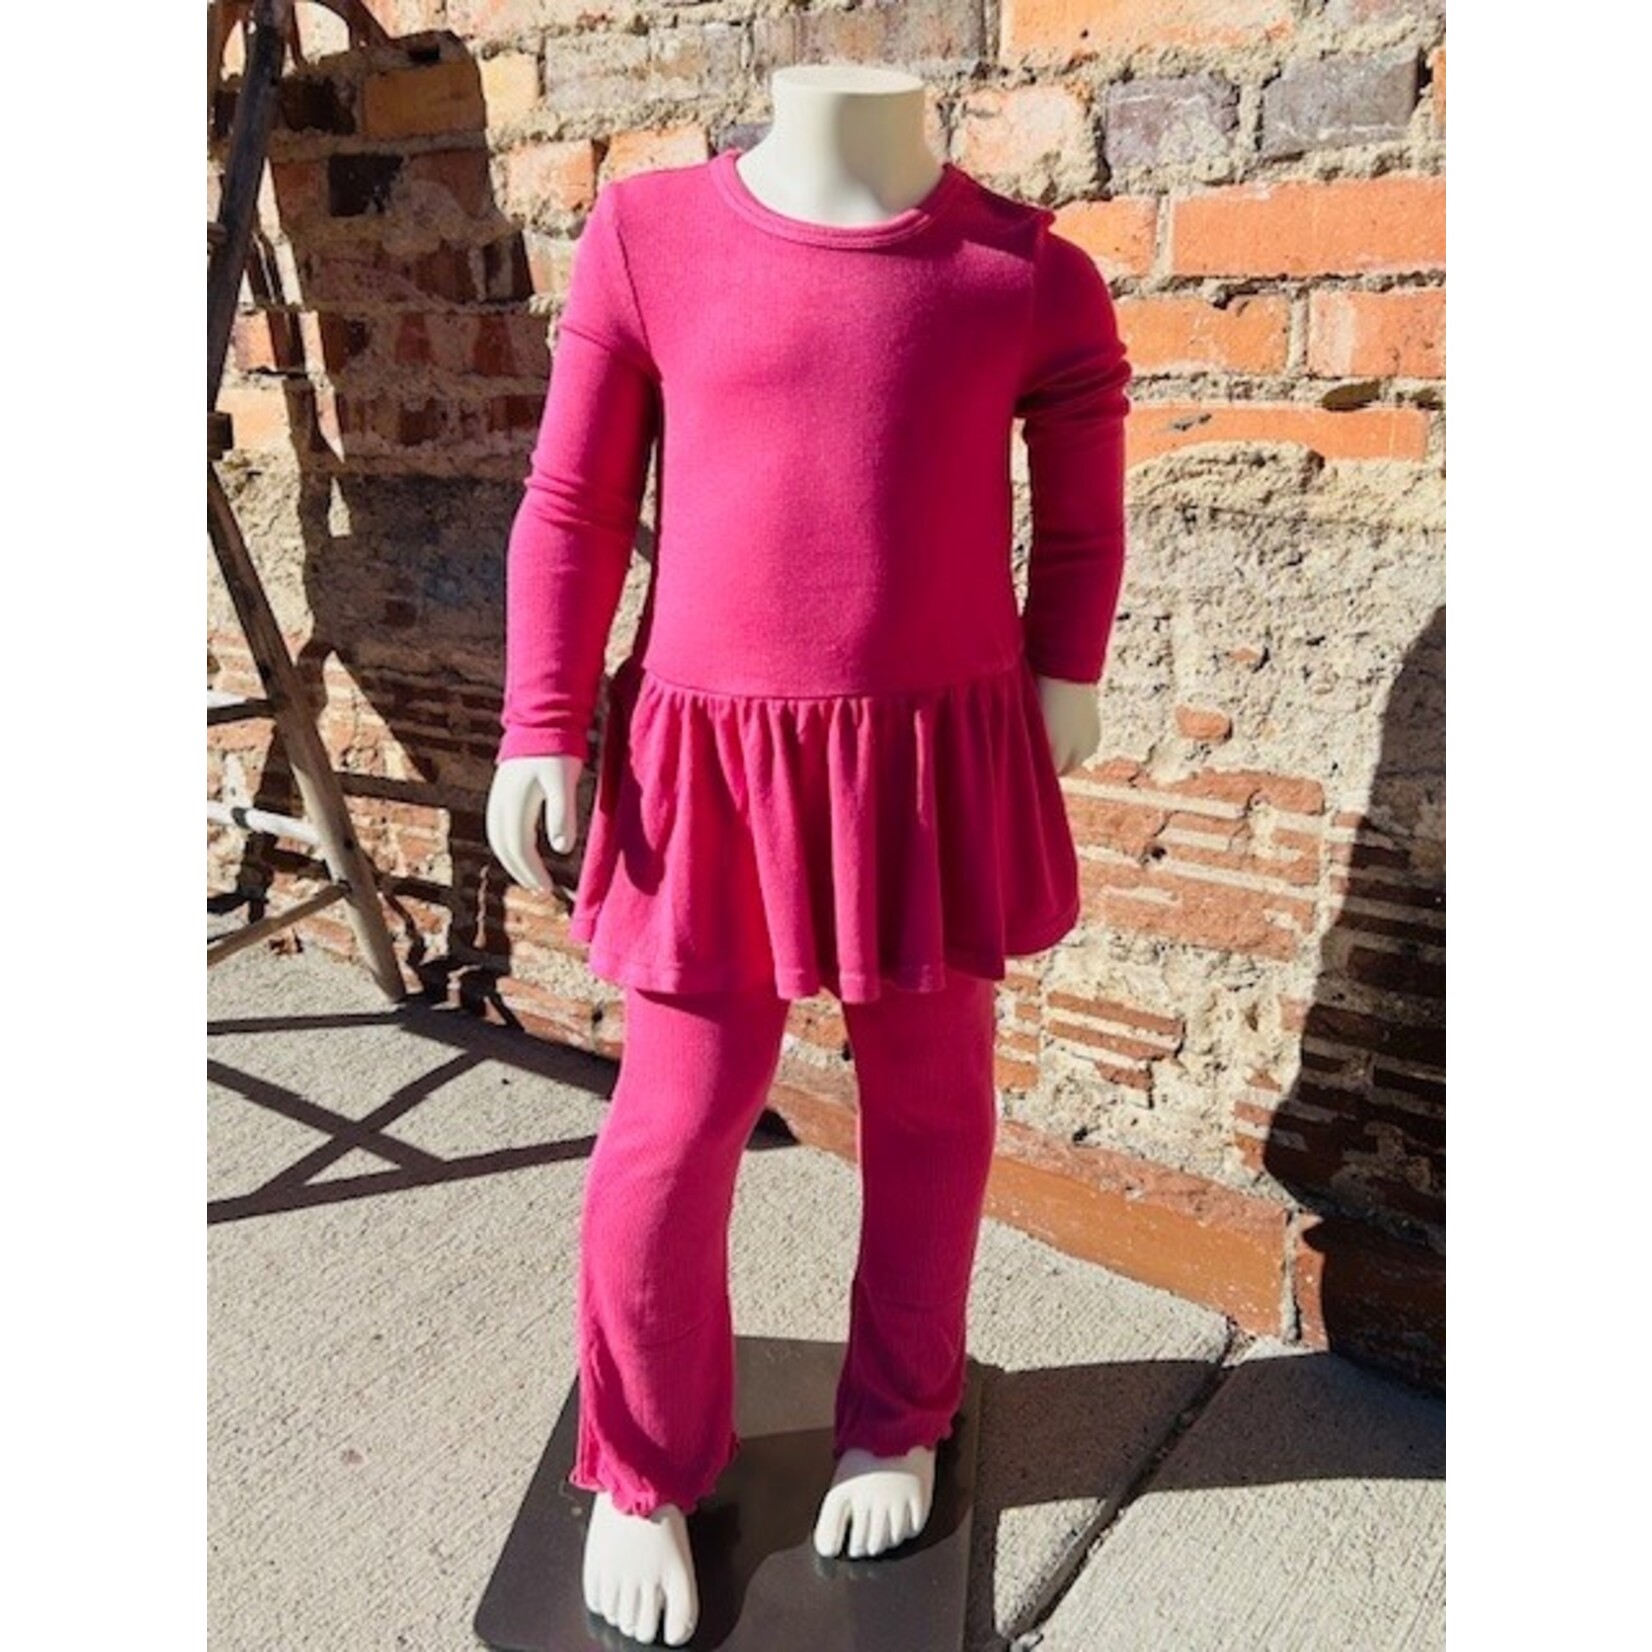 Angel Dear Peplum Top and Flare Pant Baby Set Chateau Rose